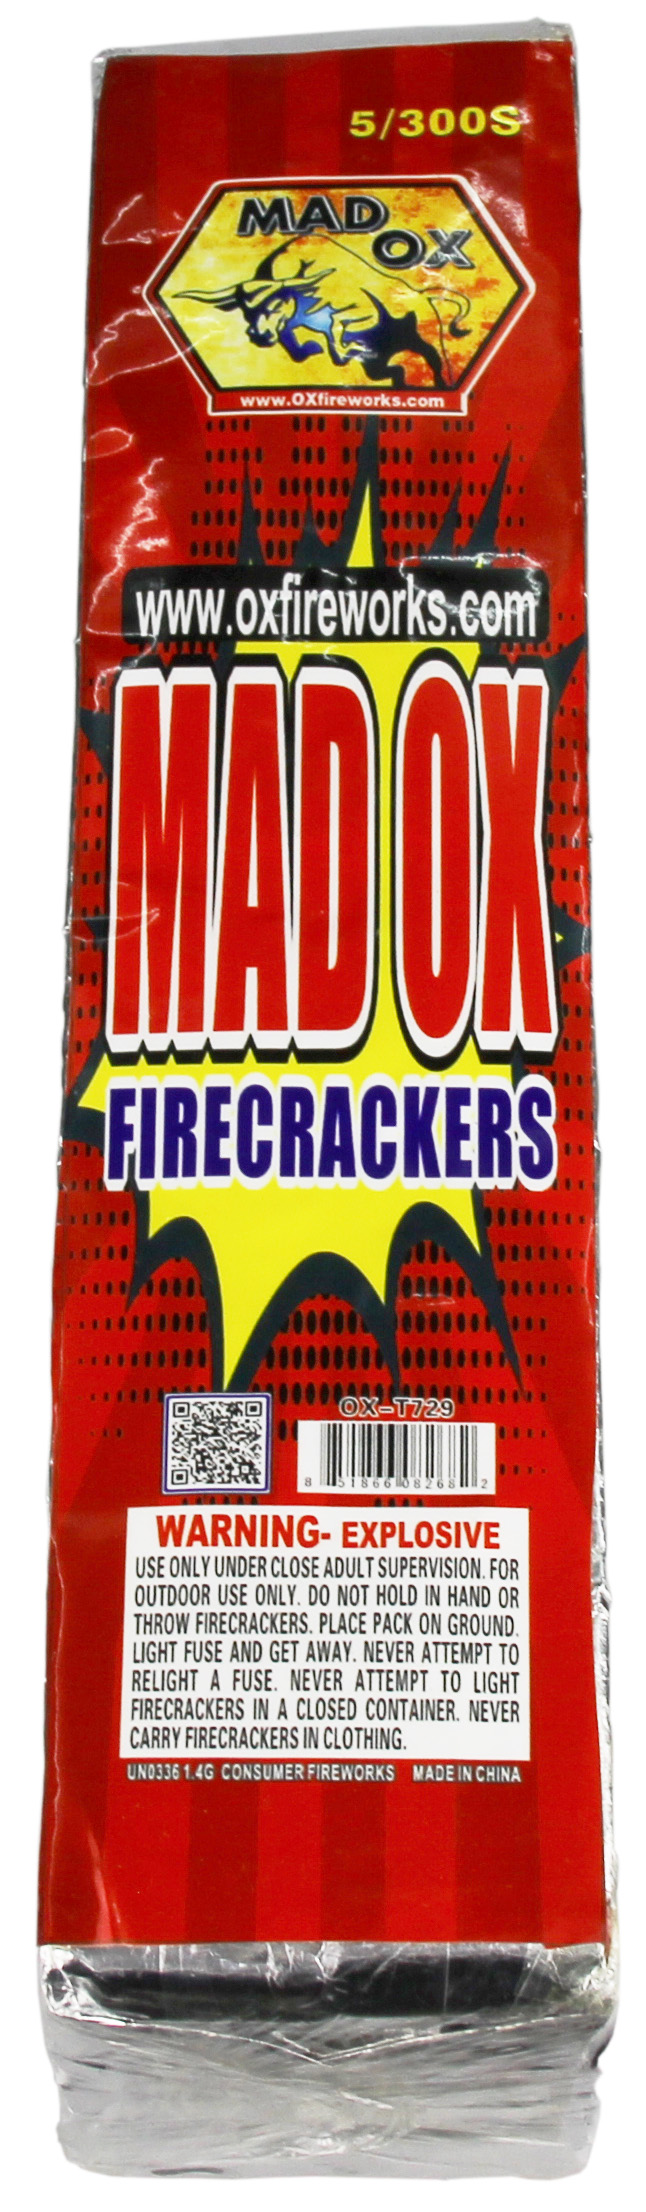 Mad Ox Firecrackers 300'S